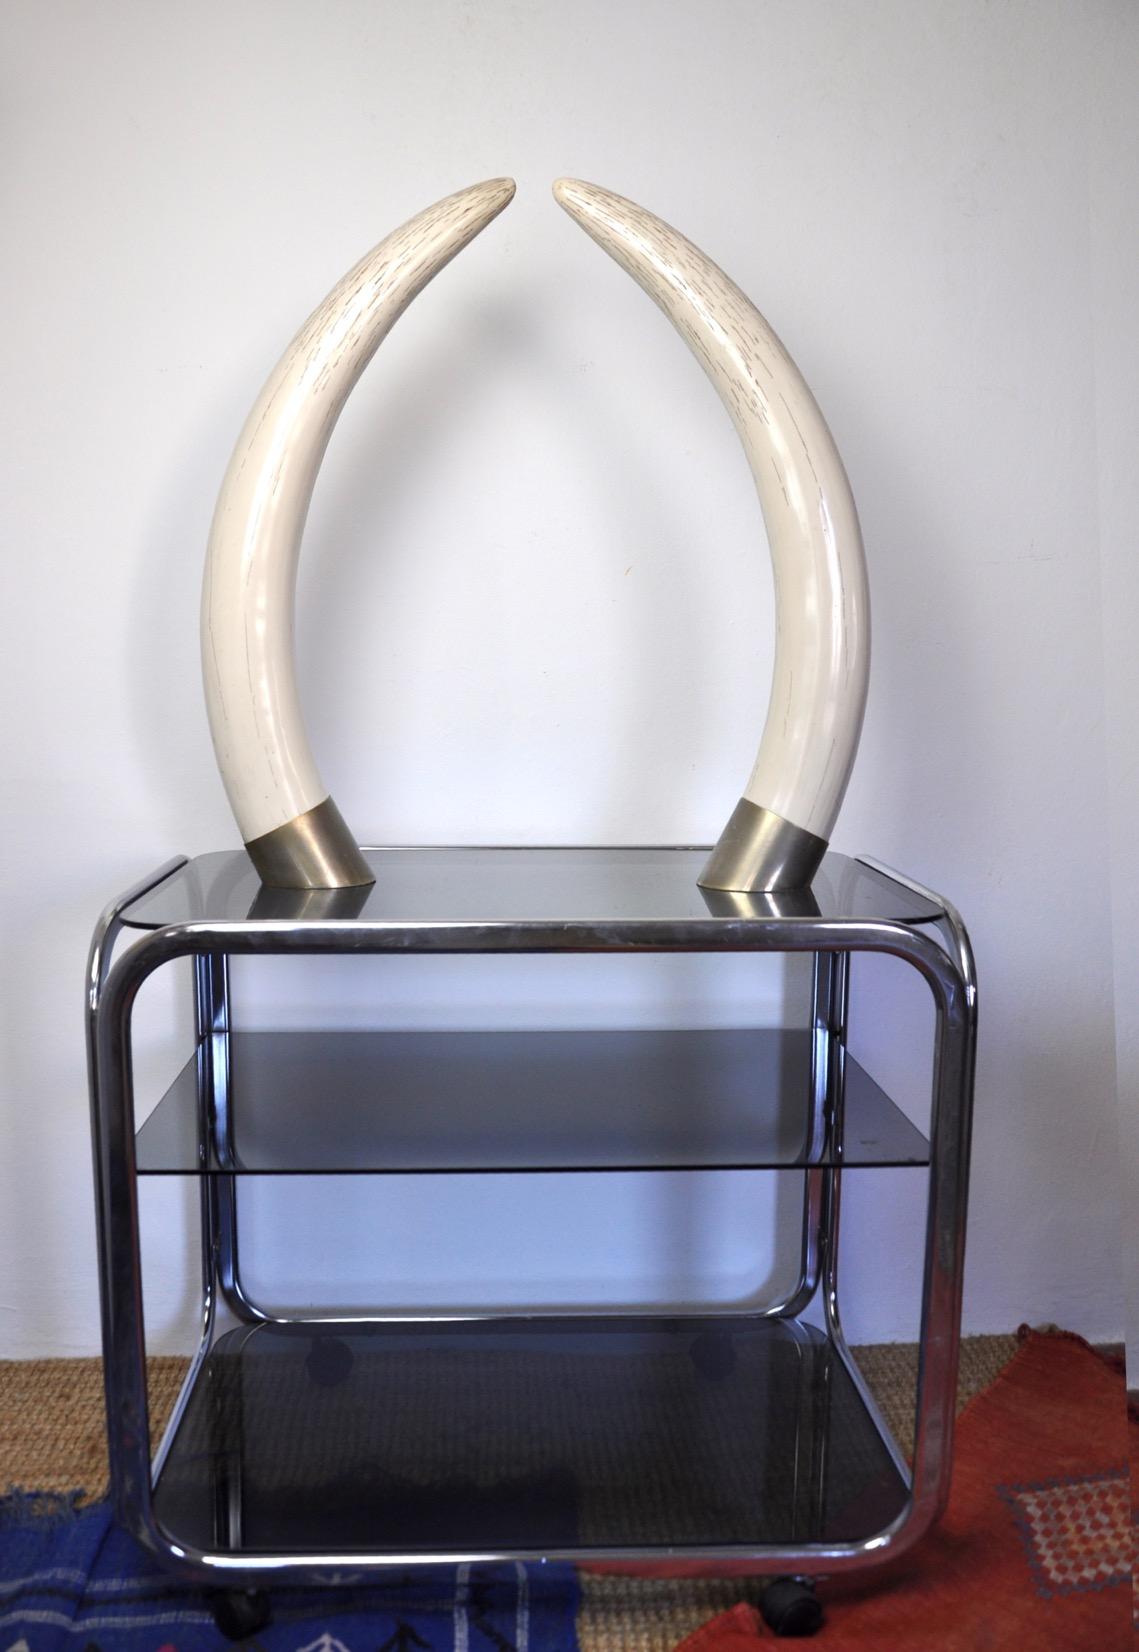 Very nice and rare pair of faux resin tusks designed and produced by Valenti in the 1970s. This pair is very rare due to its imposing size.
